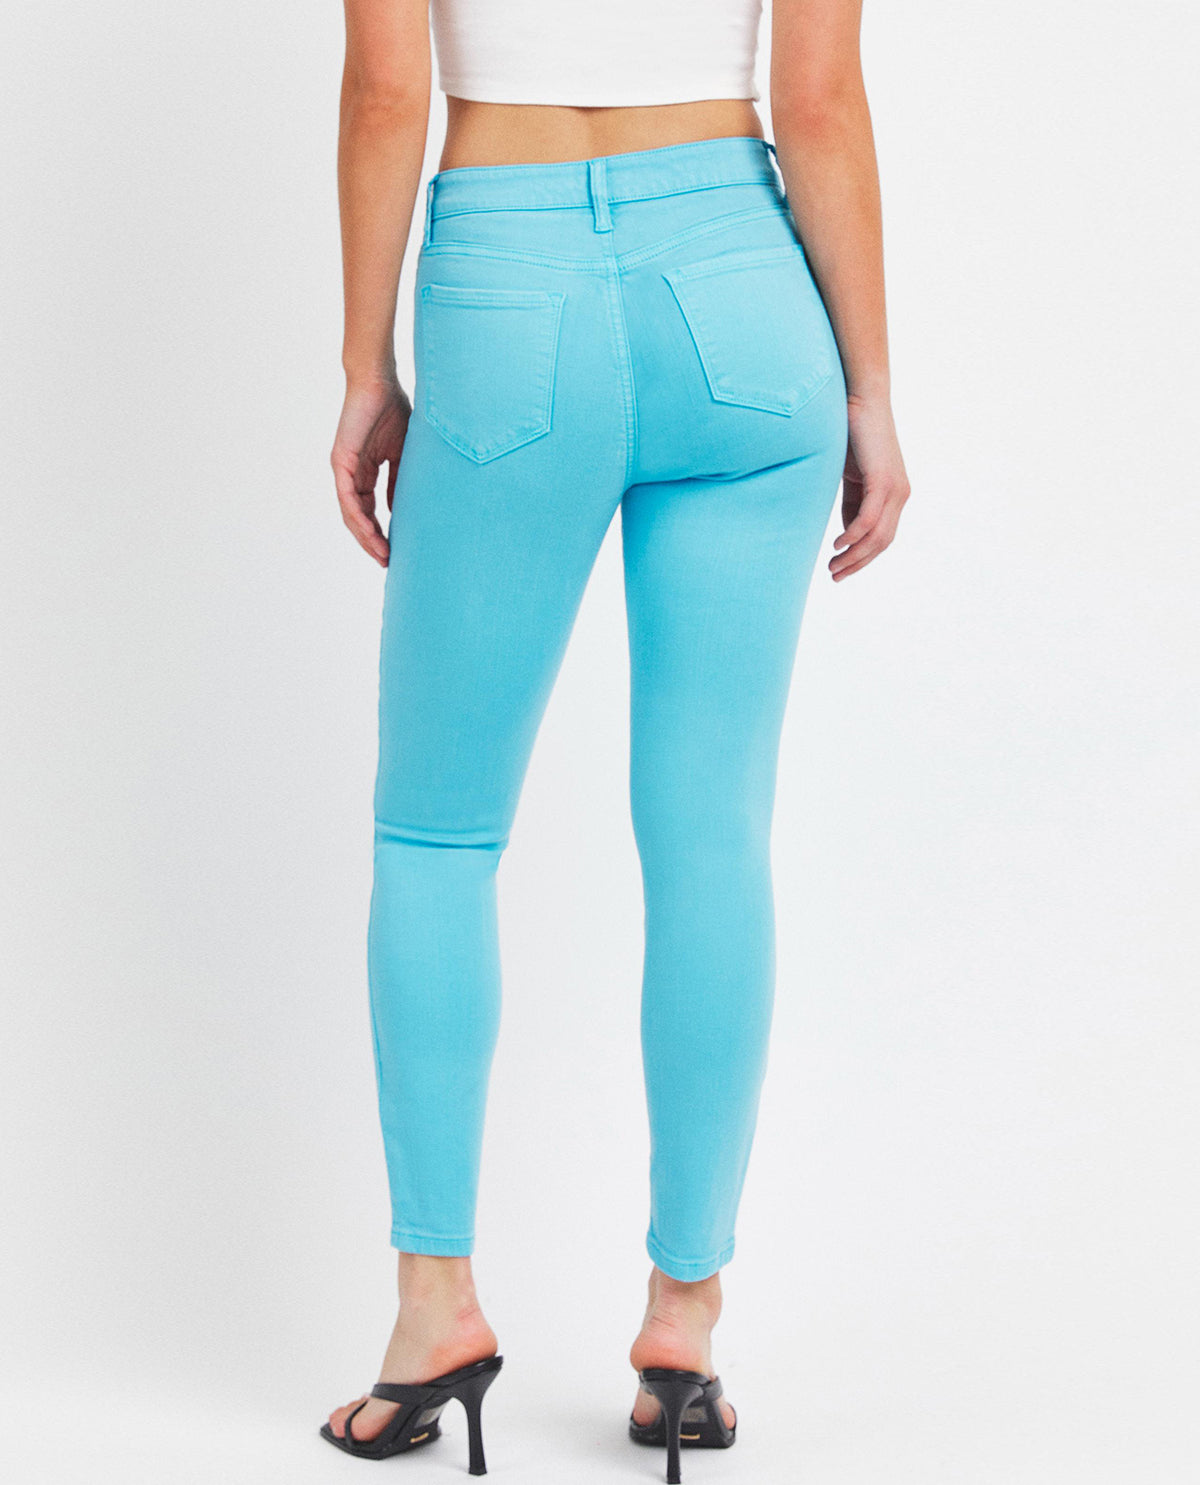 Cello Mid Rise Crop Skinny Jeans